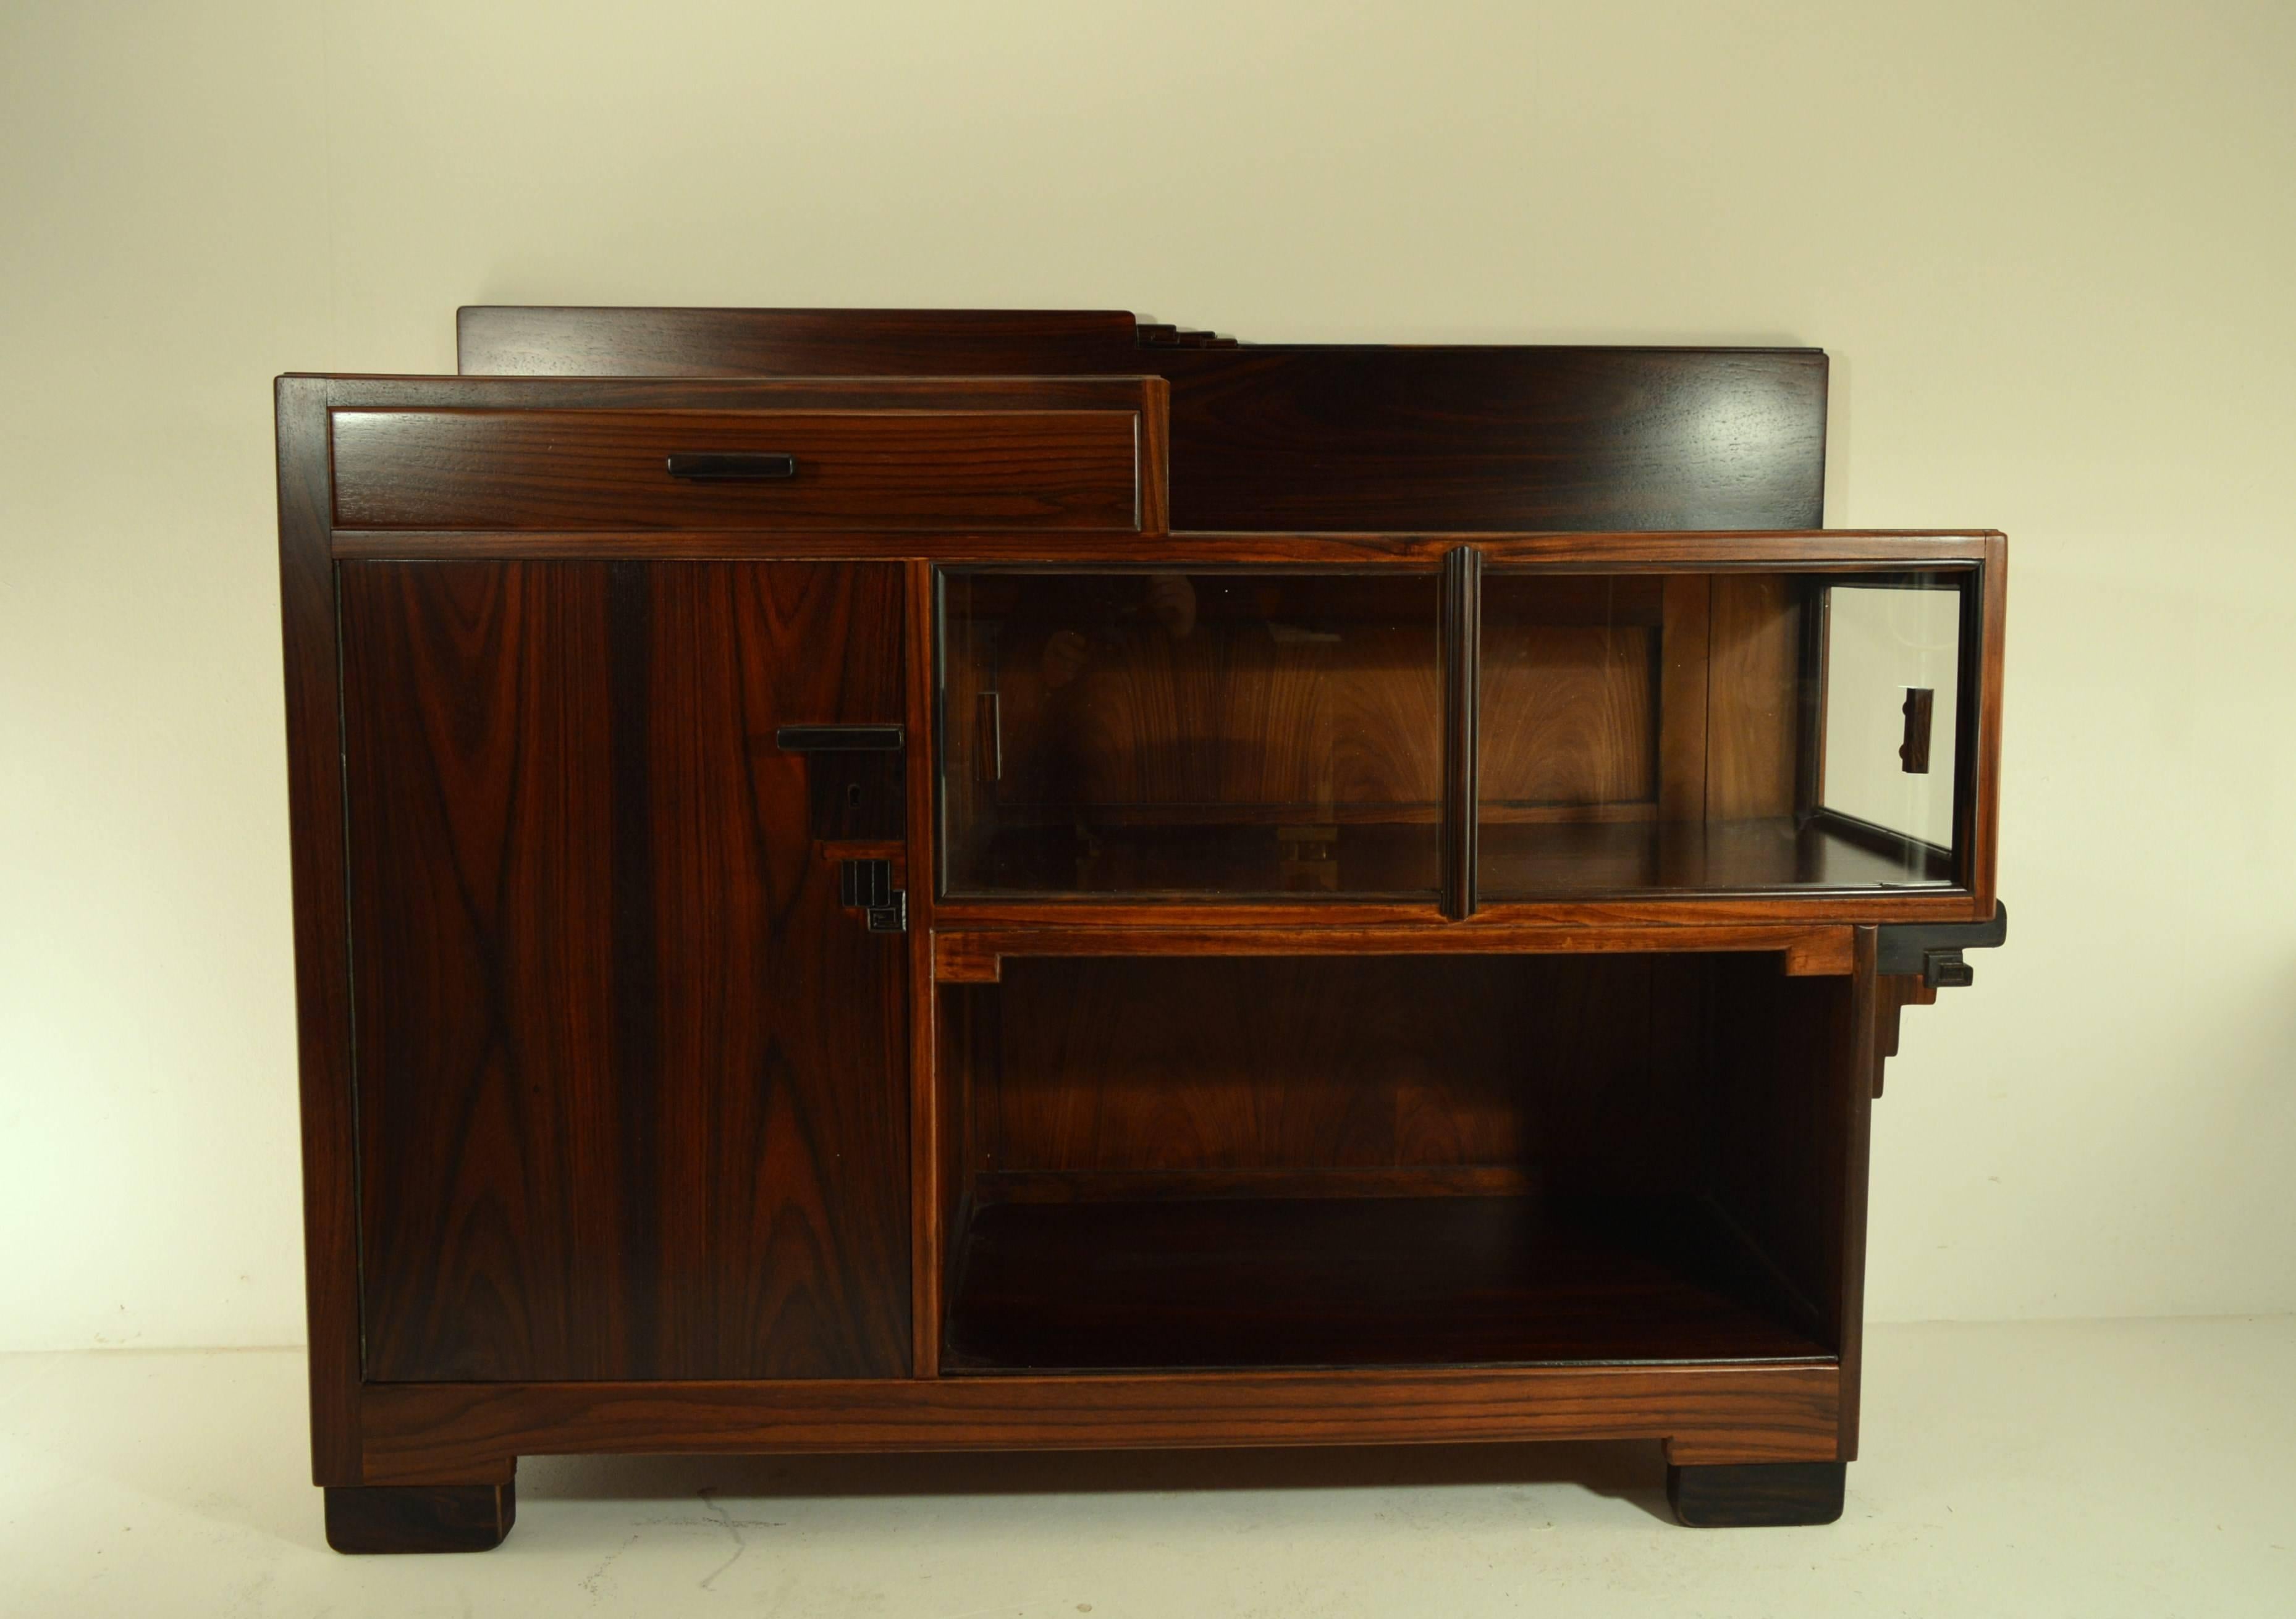 Amsterdam School Tea Cabinet in Rosewood with Ebony Details 1